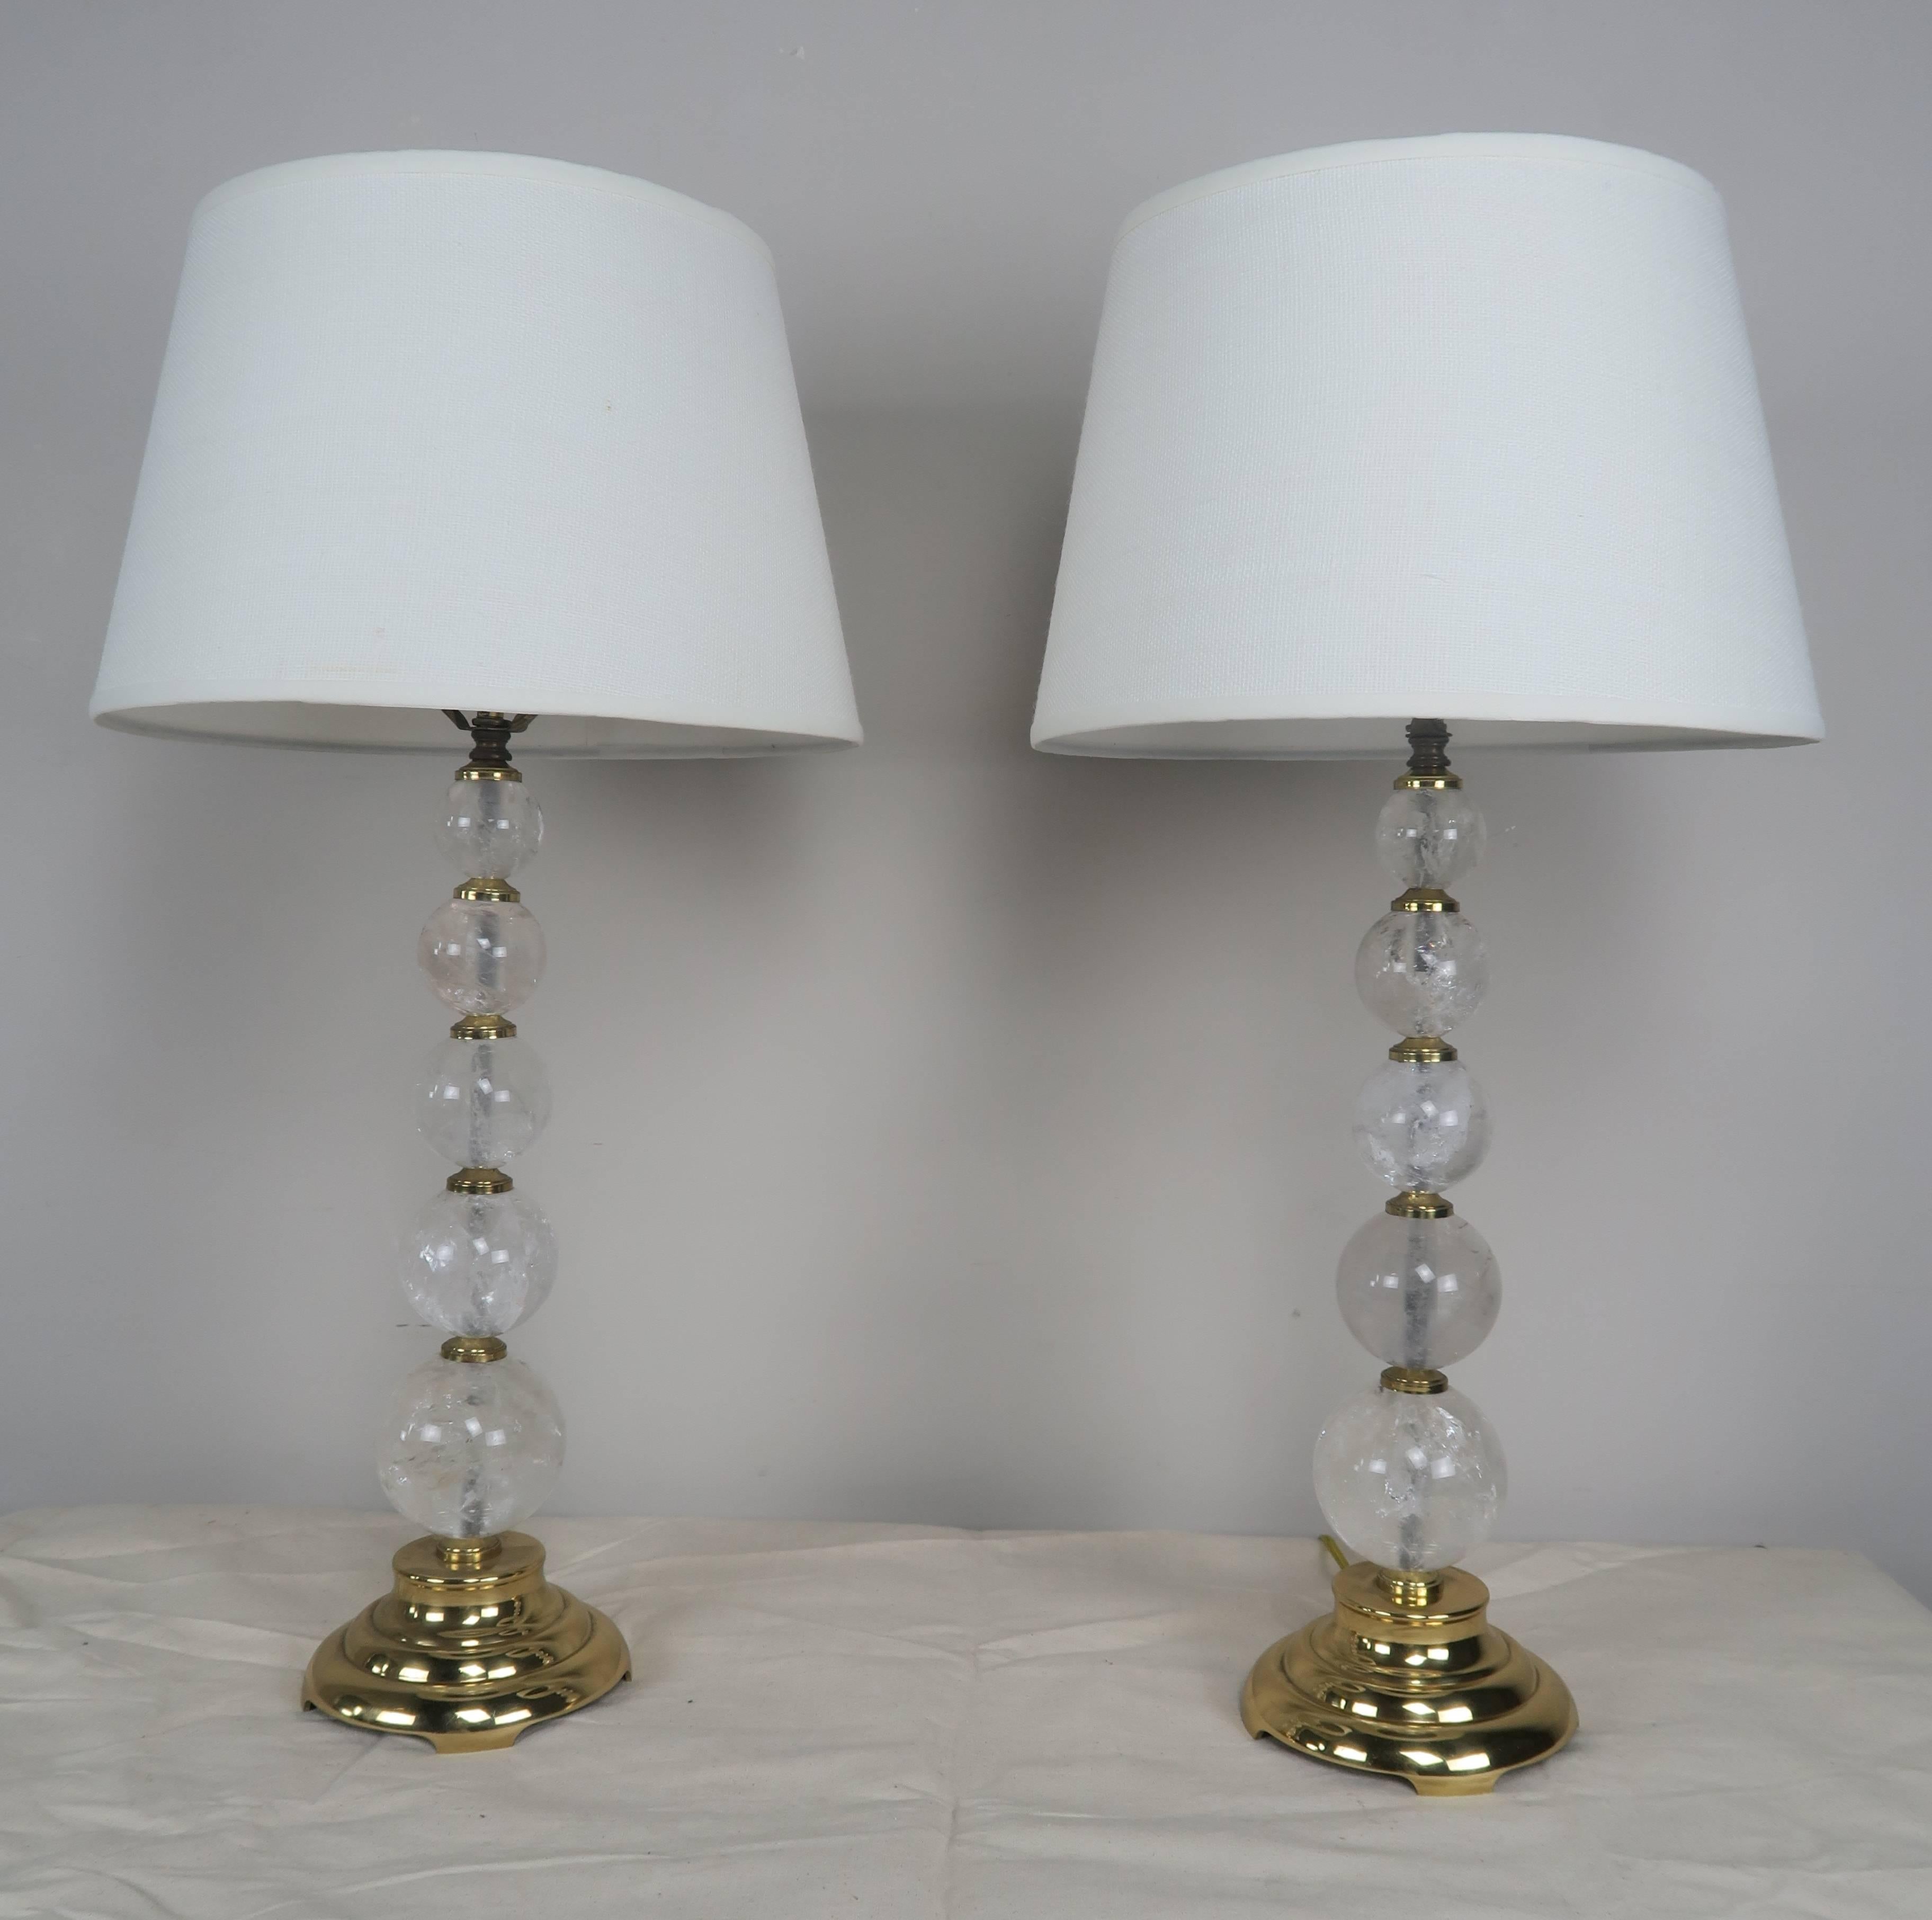 Five-rock crystal spheres make up the stem of these table lamp with polished brass bases. Rock crystal is antique from Brazil, but carved in the US. The lamps are crowned with custom white linen shades. The lamps are newly rewired and are ready to